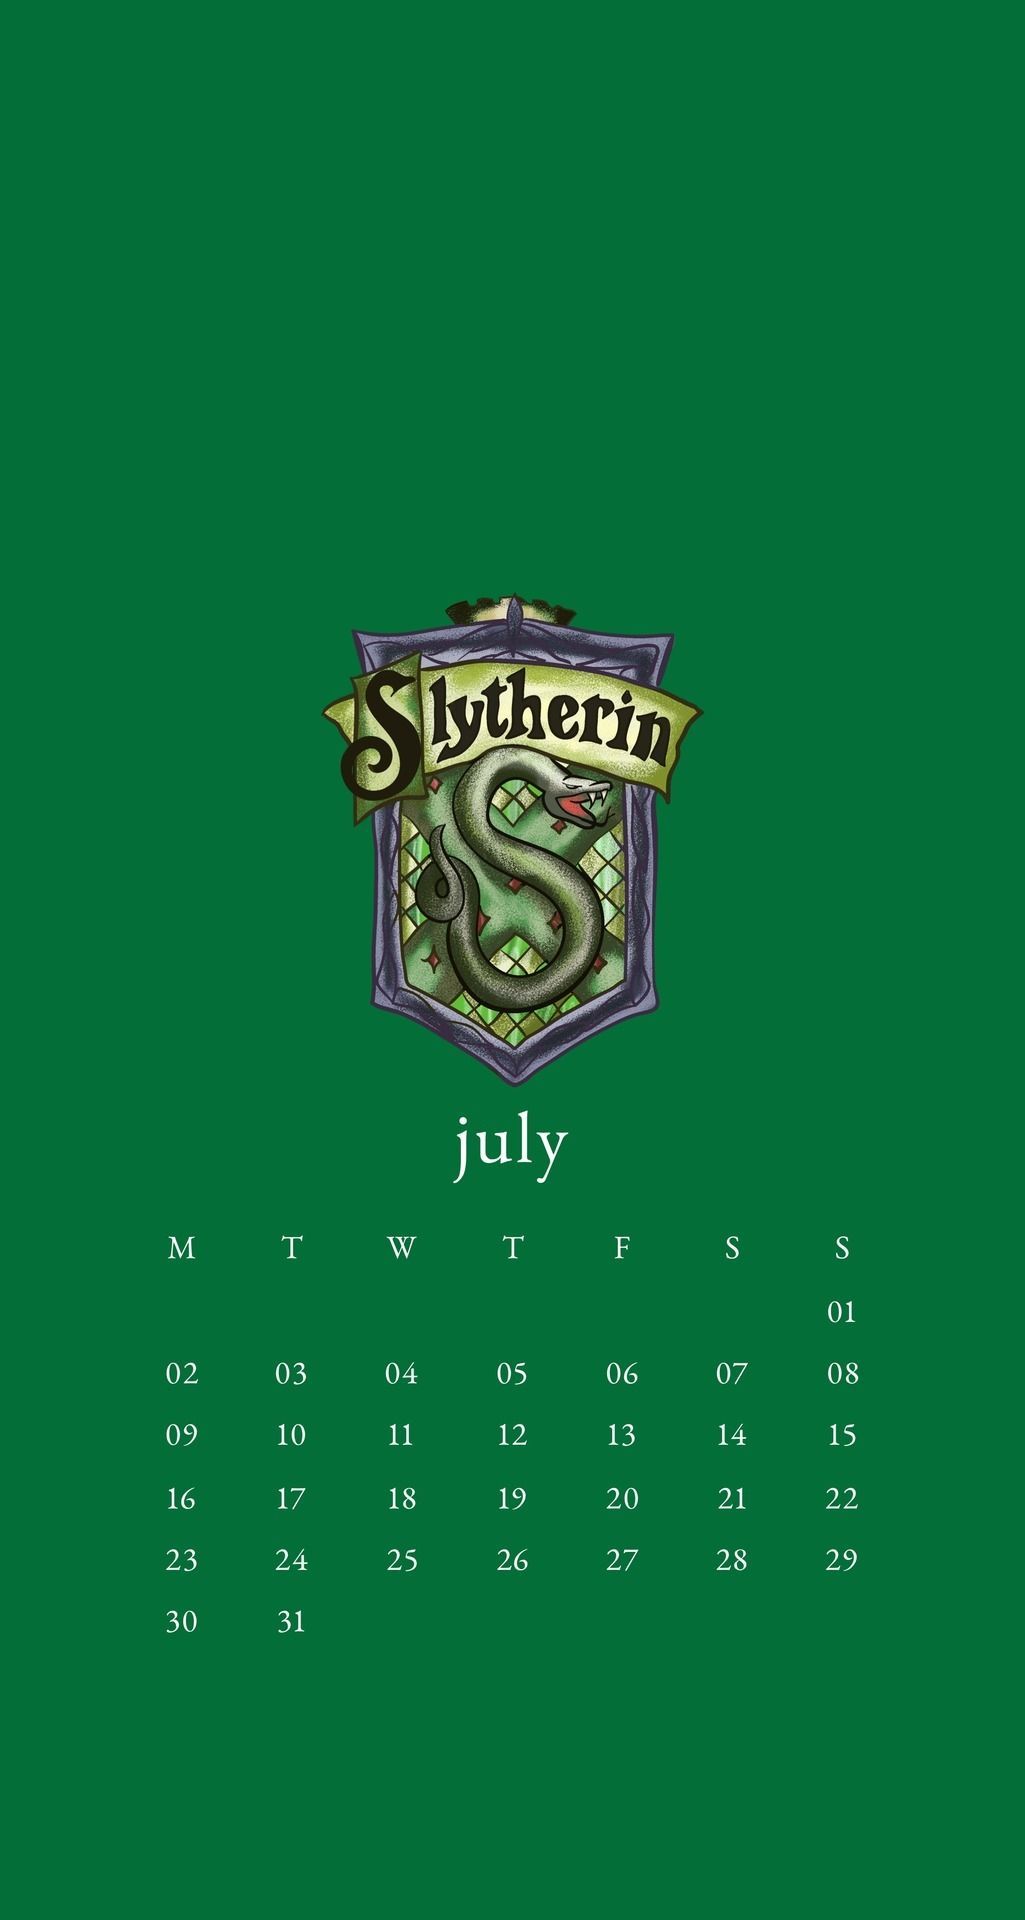 Slytherin iPhone wallpaper  Harry potter wallpaper Harry potter iphone  wallpaper Snape harry potter